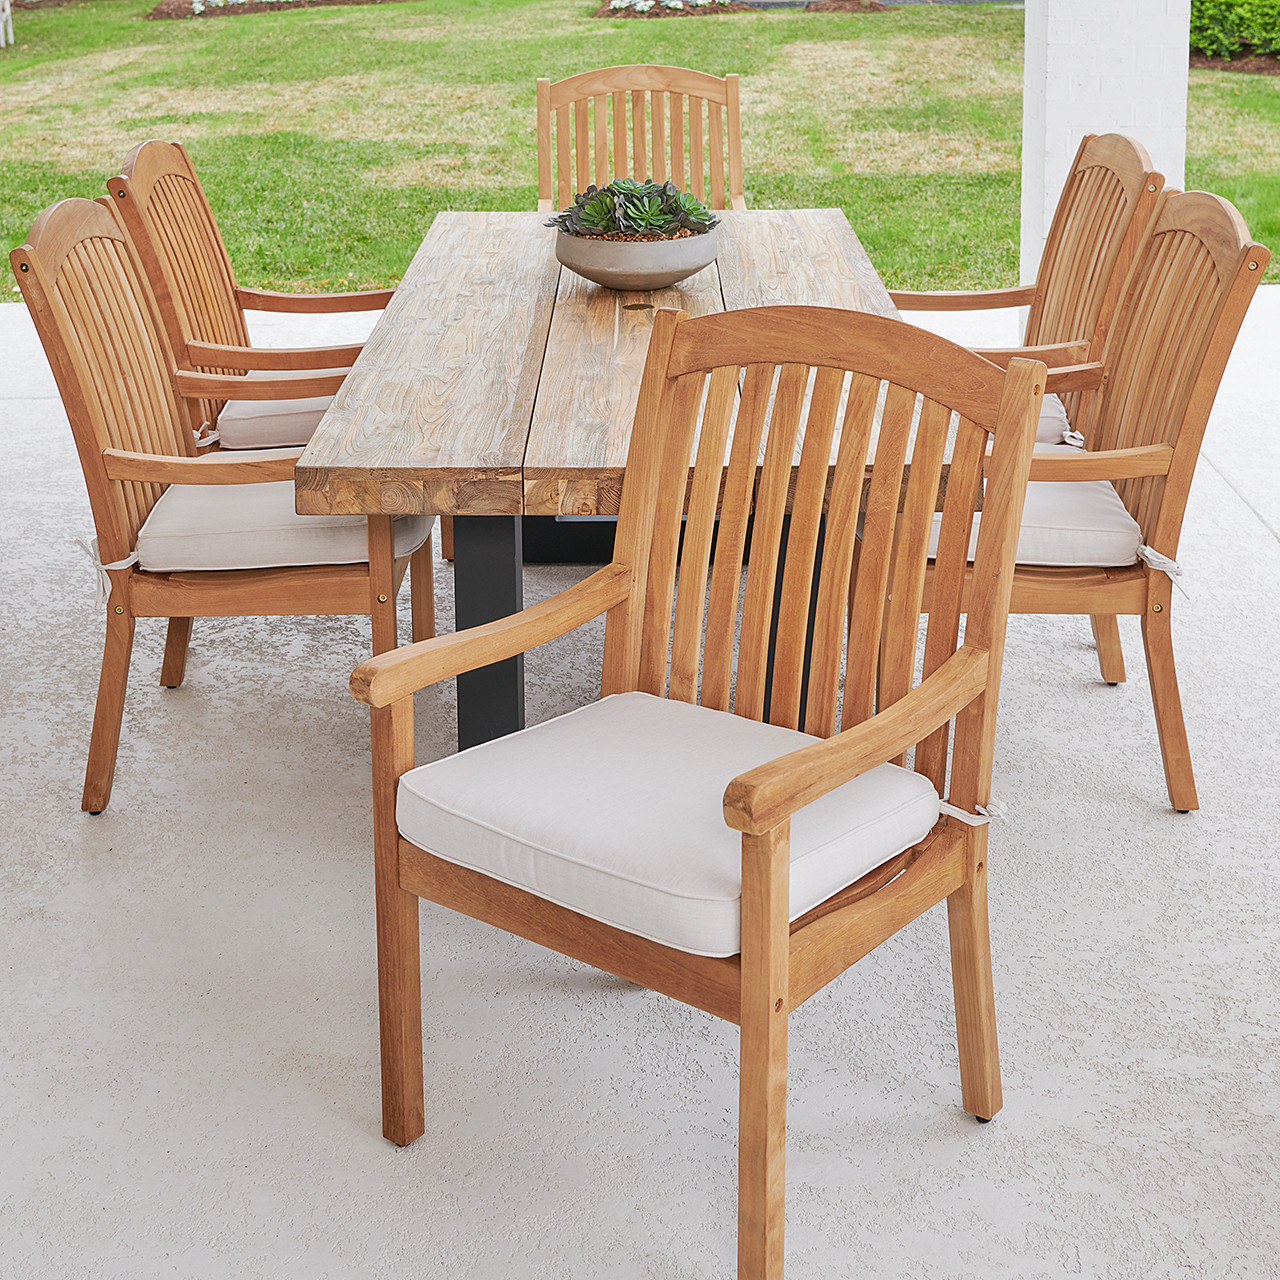 Eastchester Teak with Cushions 7 Piece Dining Set + Balencia 84 x 40 in. Table